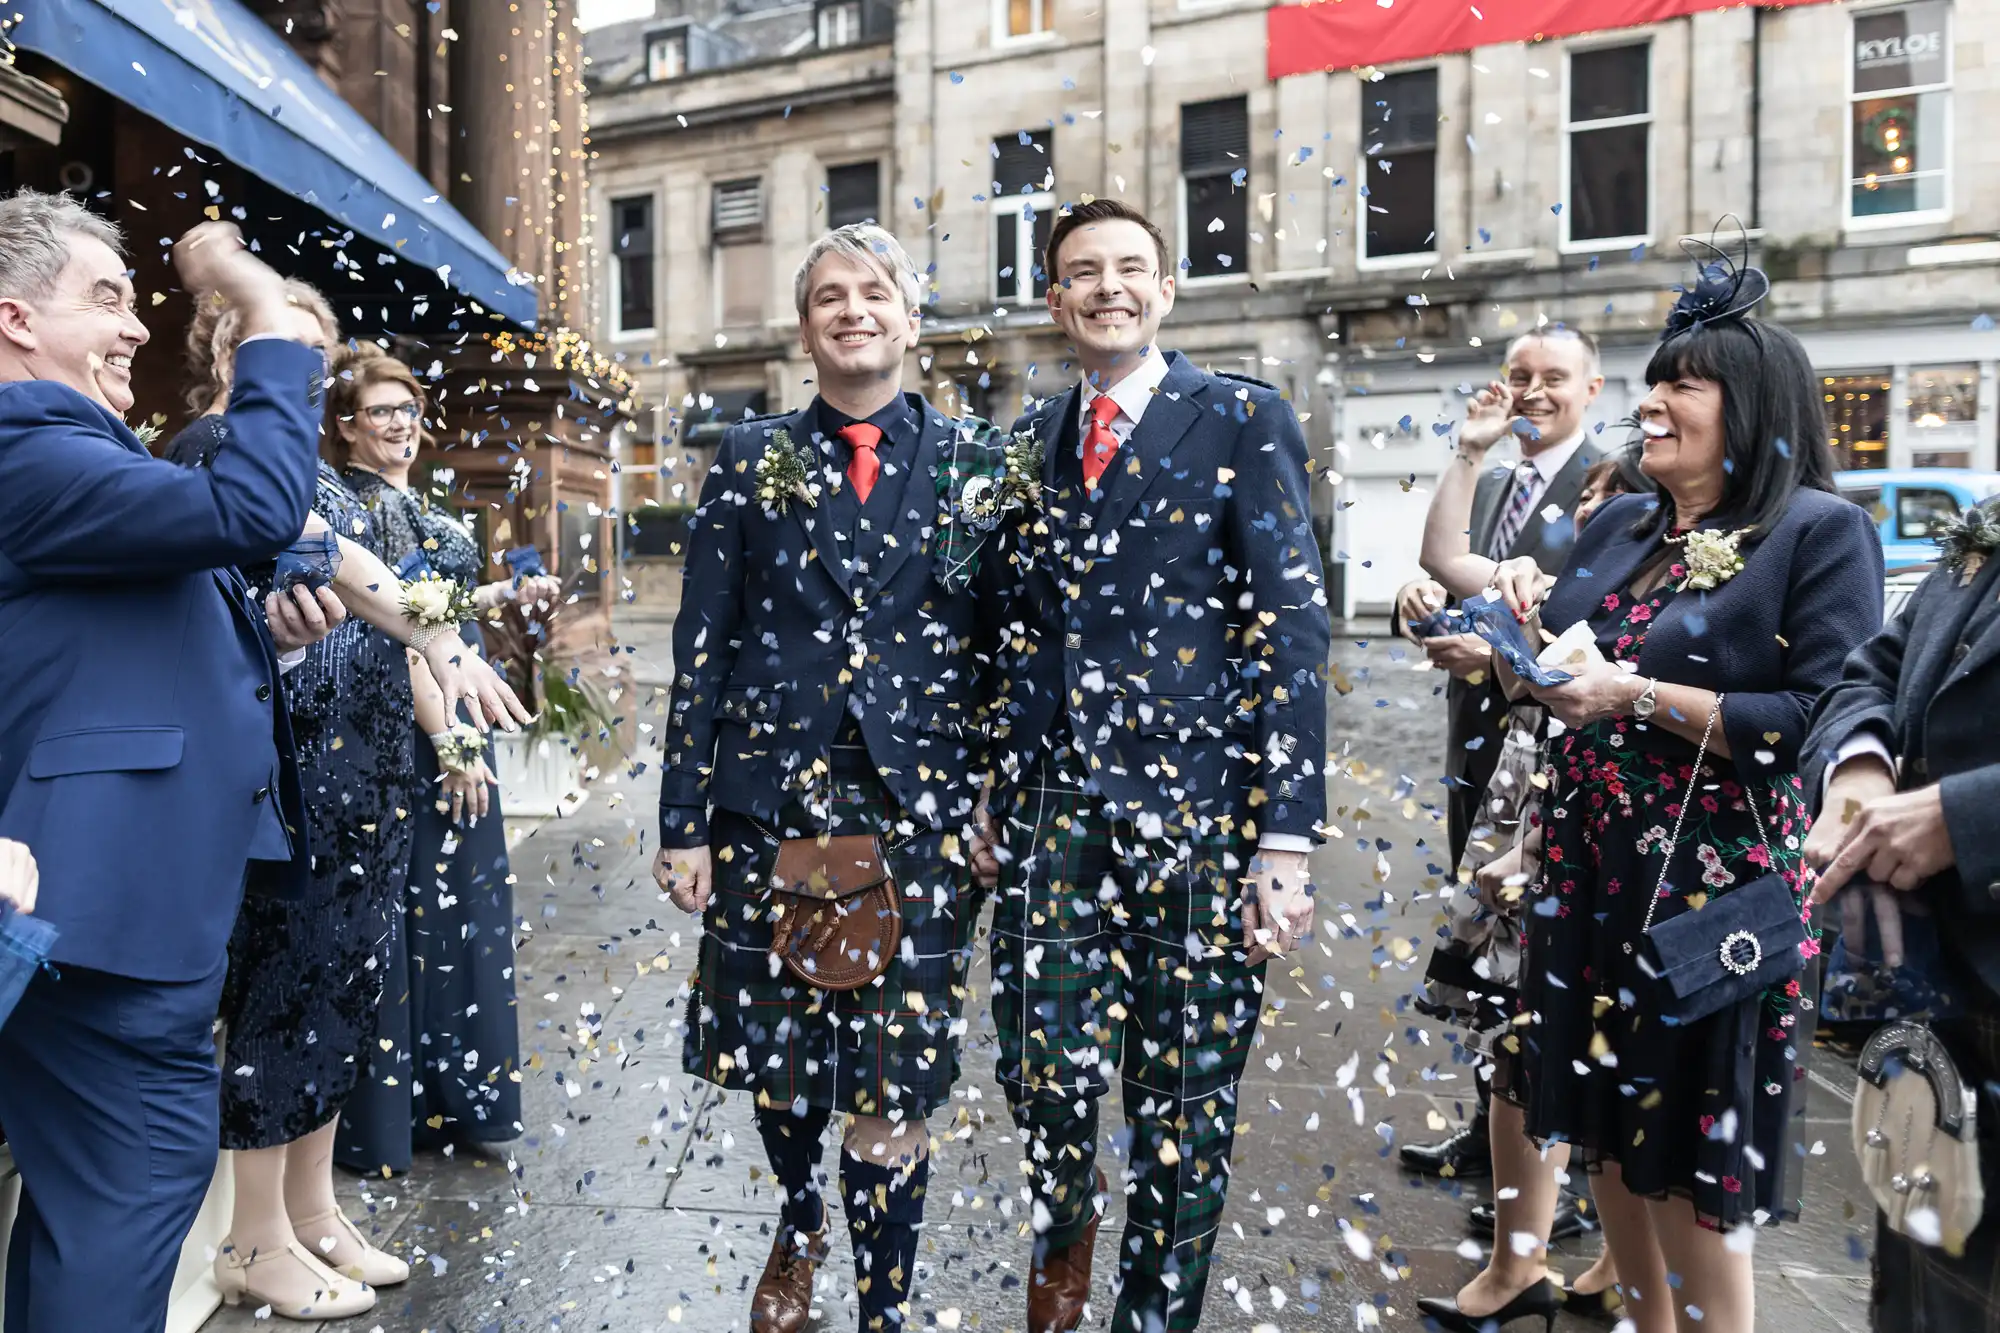 Two men, dressed in kilts and suits, walk down a street while surrounded by people throwing confetti. The background features a building and onlookers dressed in formal attire.